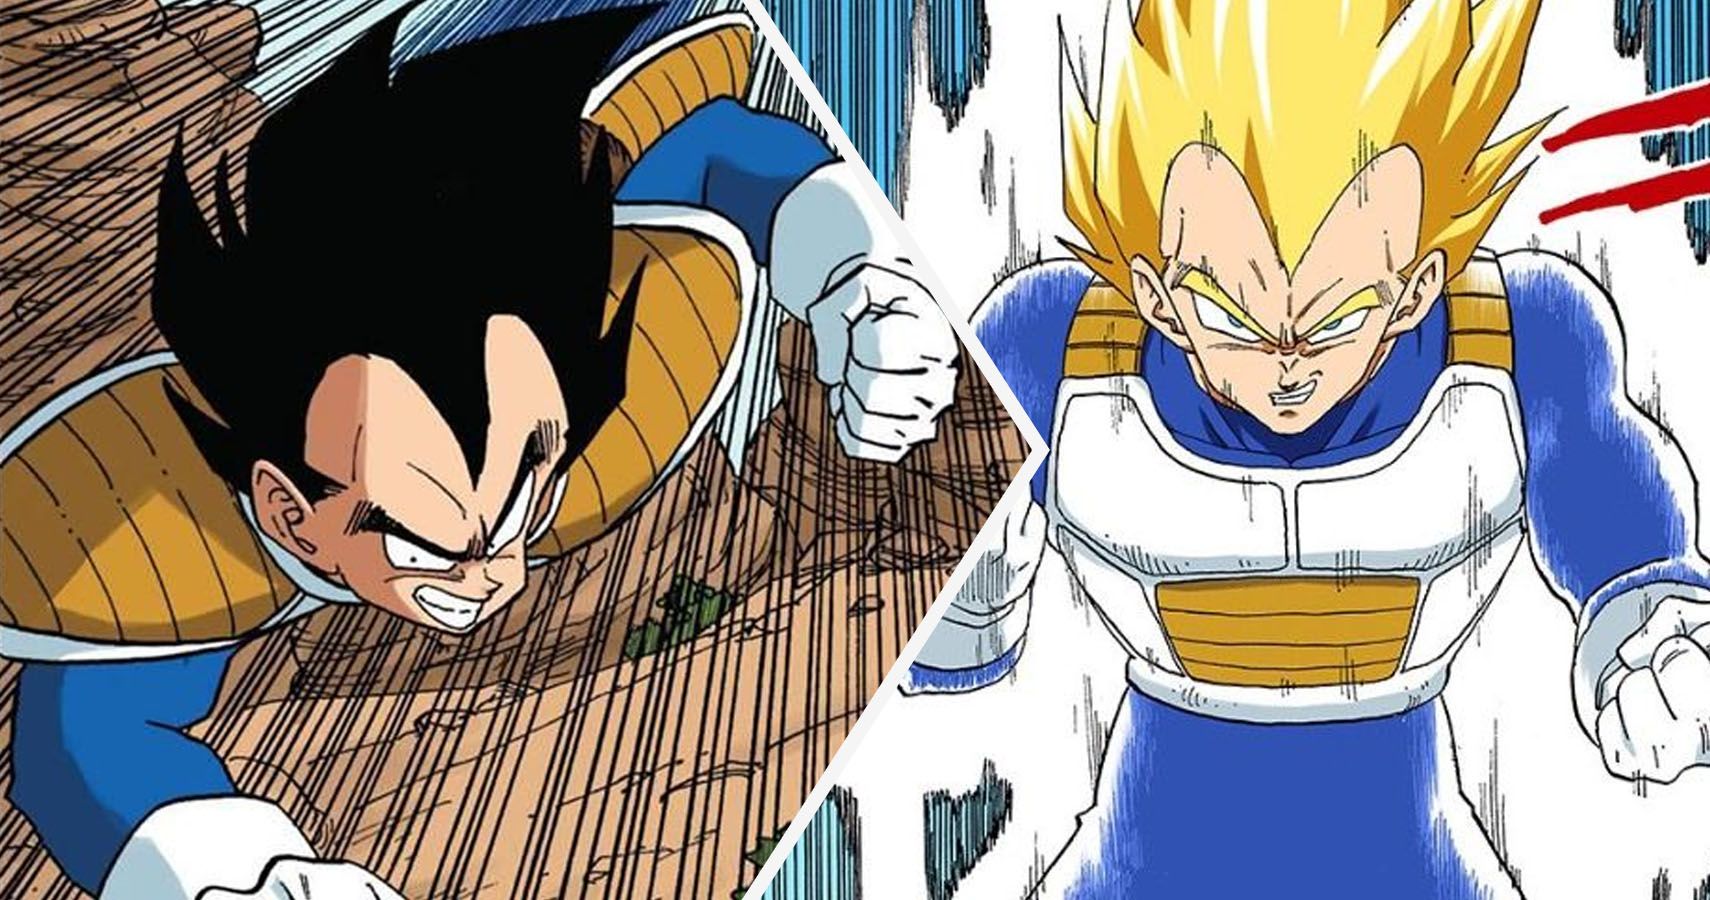 Dragon Ball: Every Time Vegeta Was Stronger Than Goku (In Chronological Order)